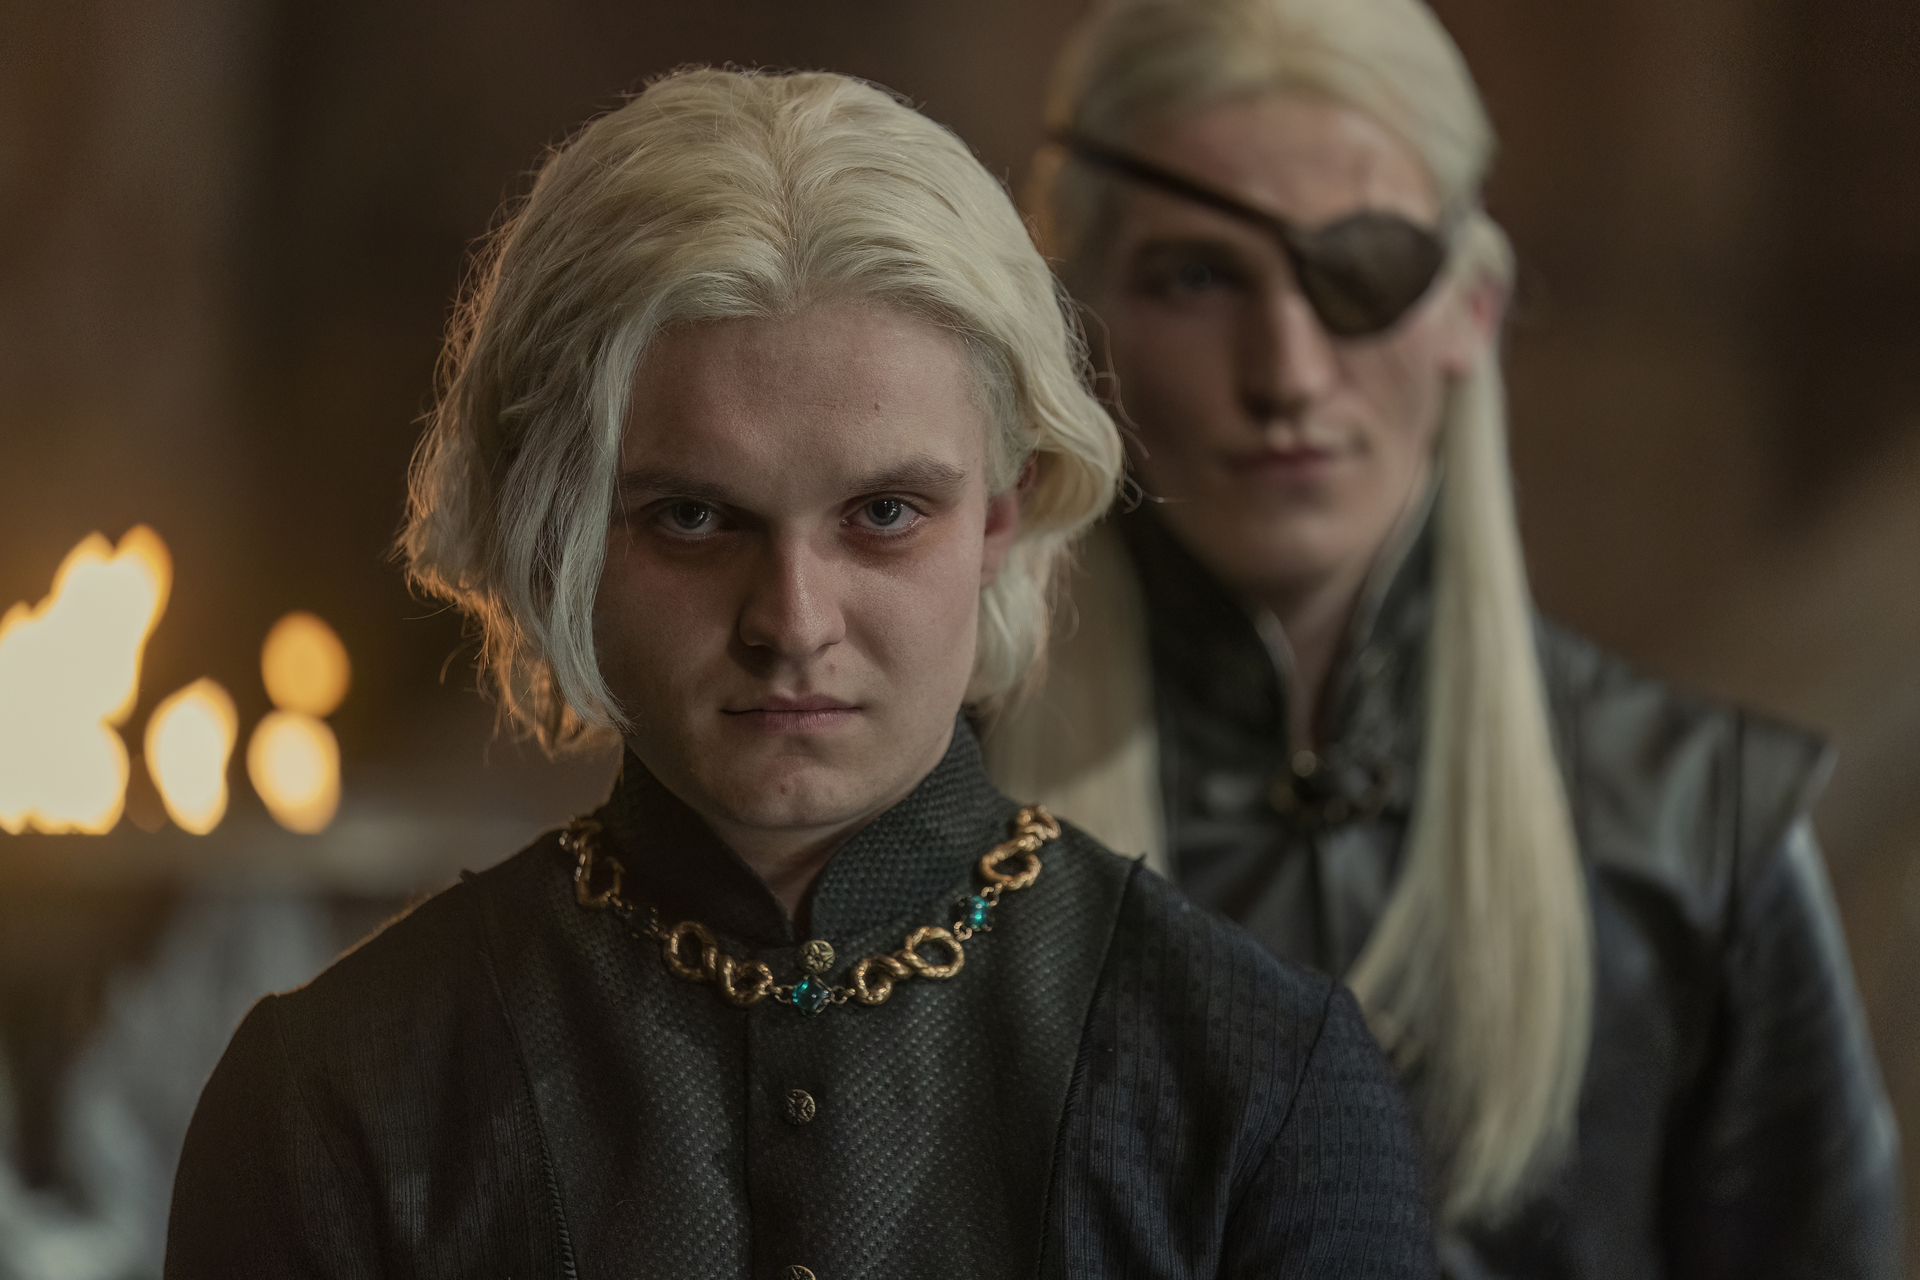 Aegon in the foreground looking grumpy about something, while his eyepatch-clad brother stands behind him out of focus, in House of the Dragon